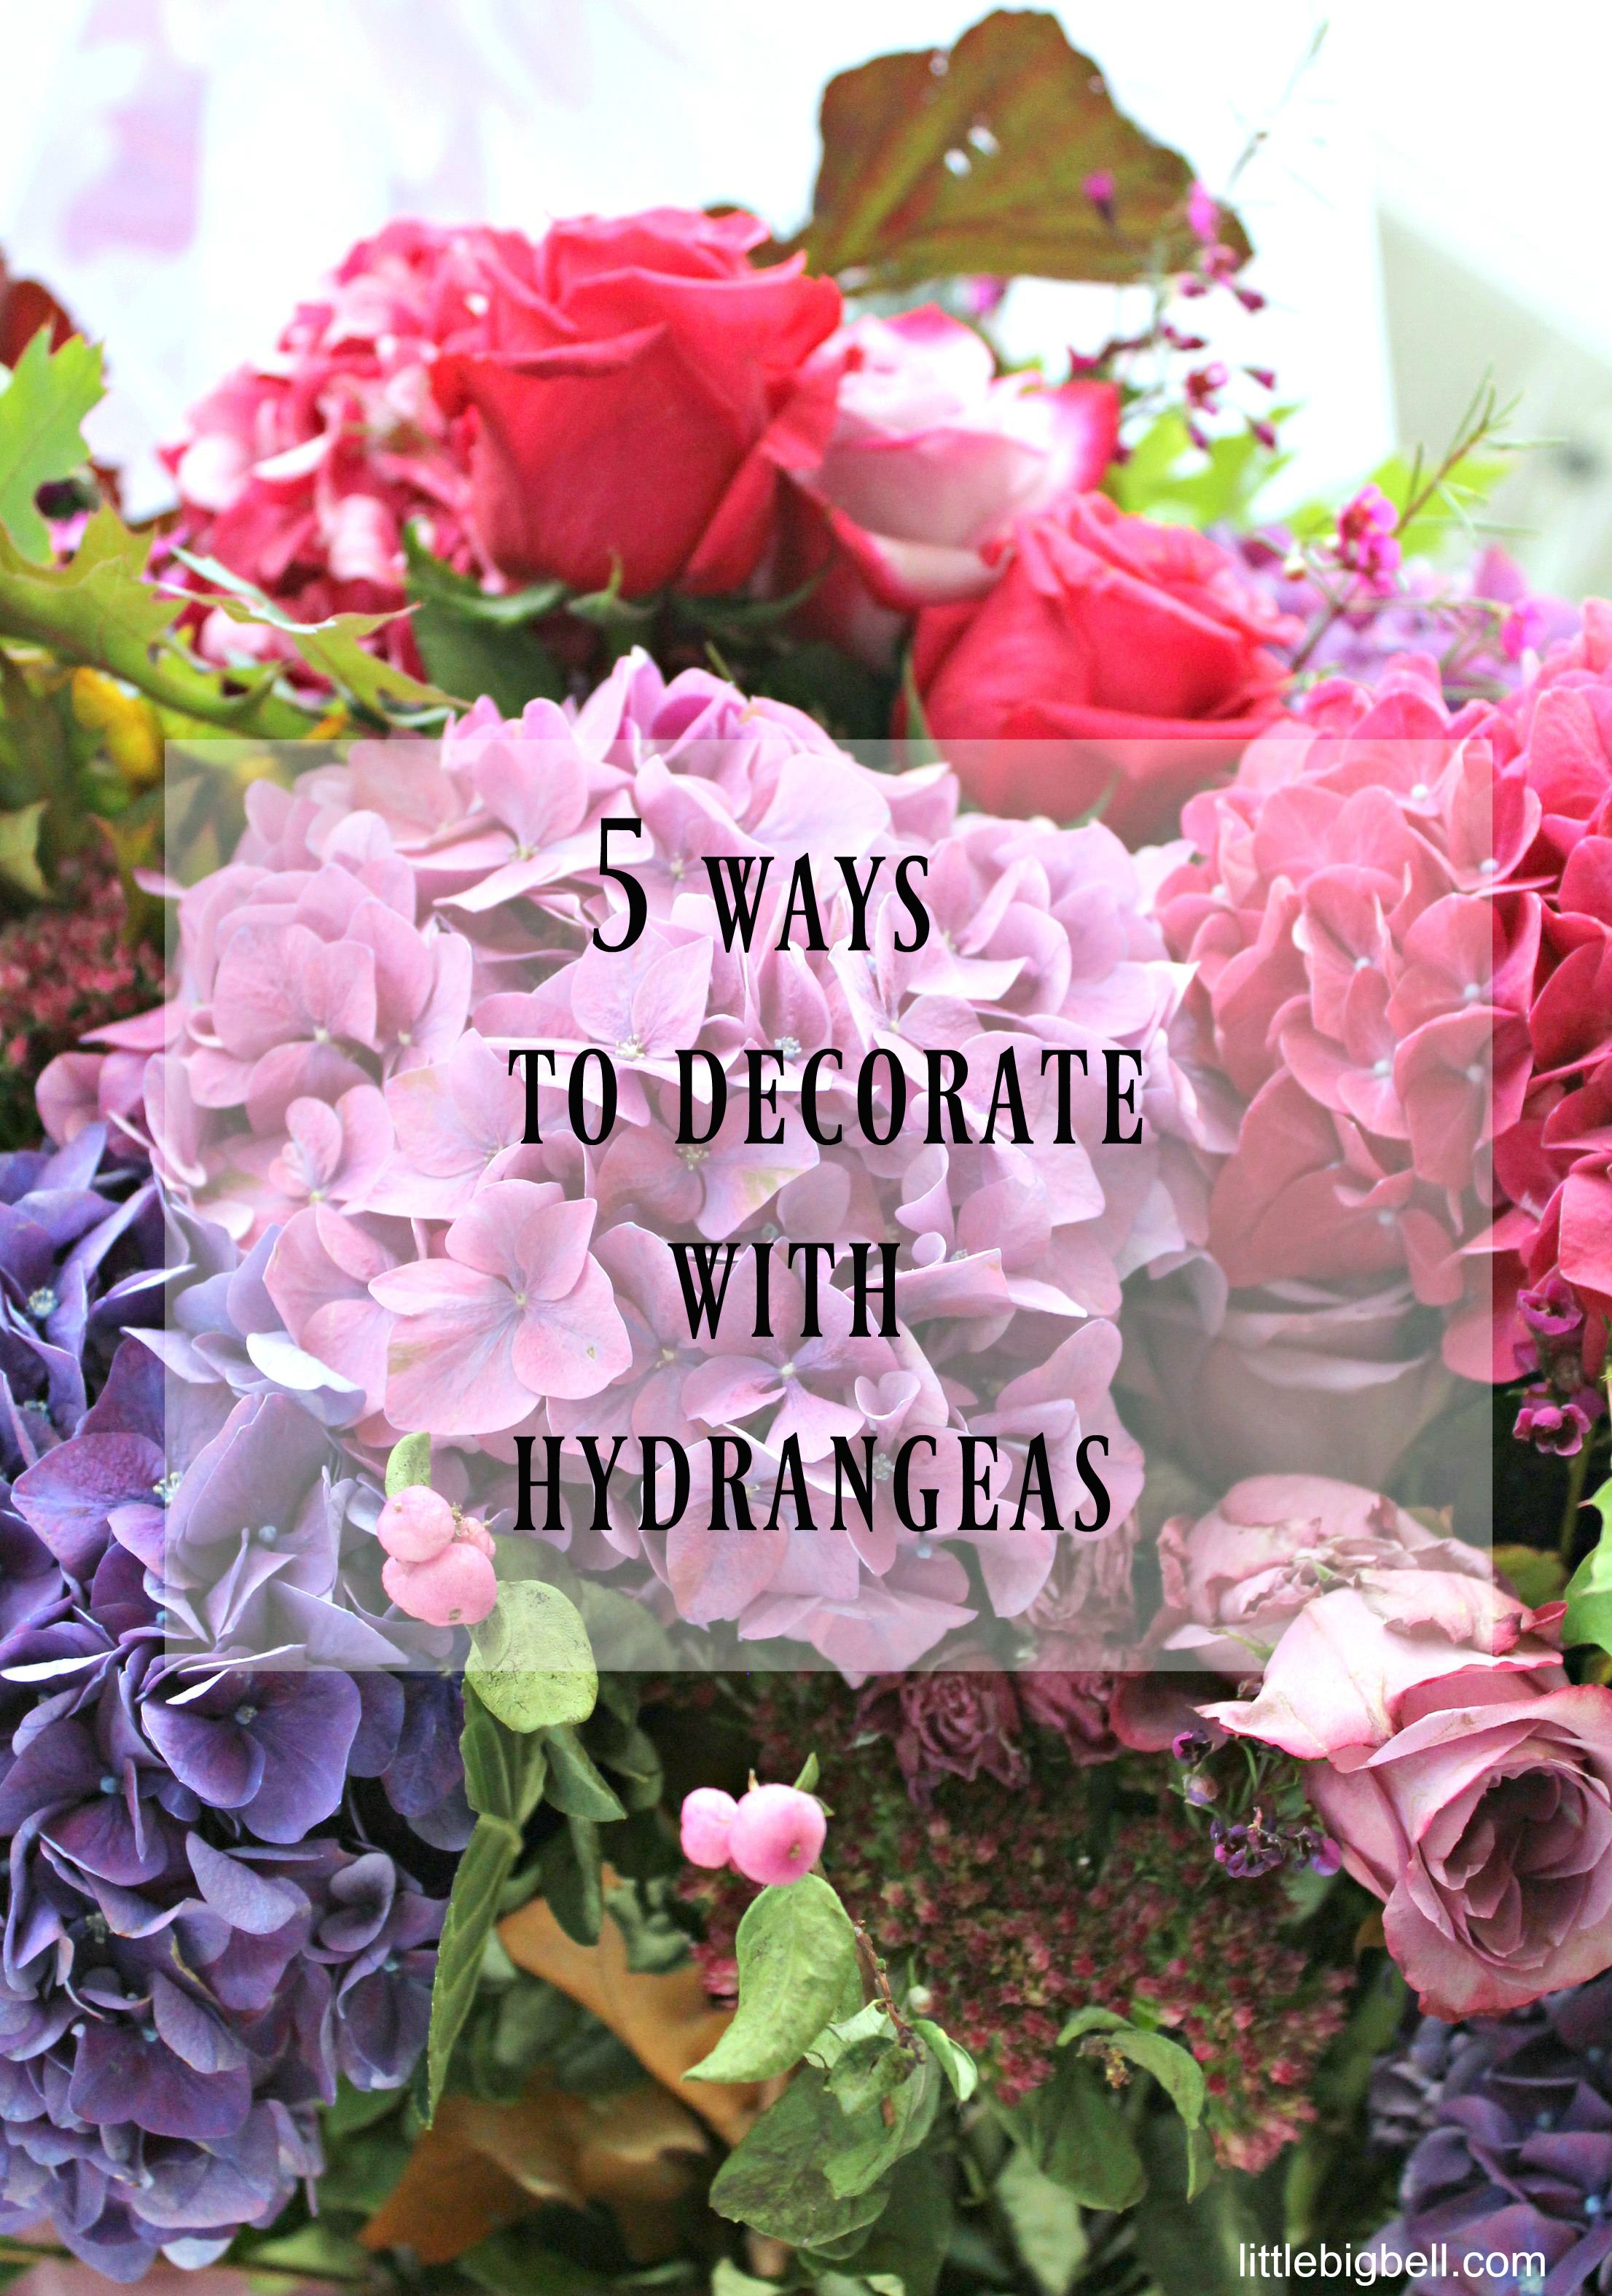 5-ways-to-decorate-with-hydrangeas-Little-Big-Bell